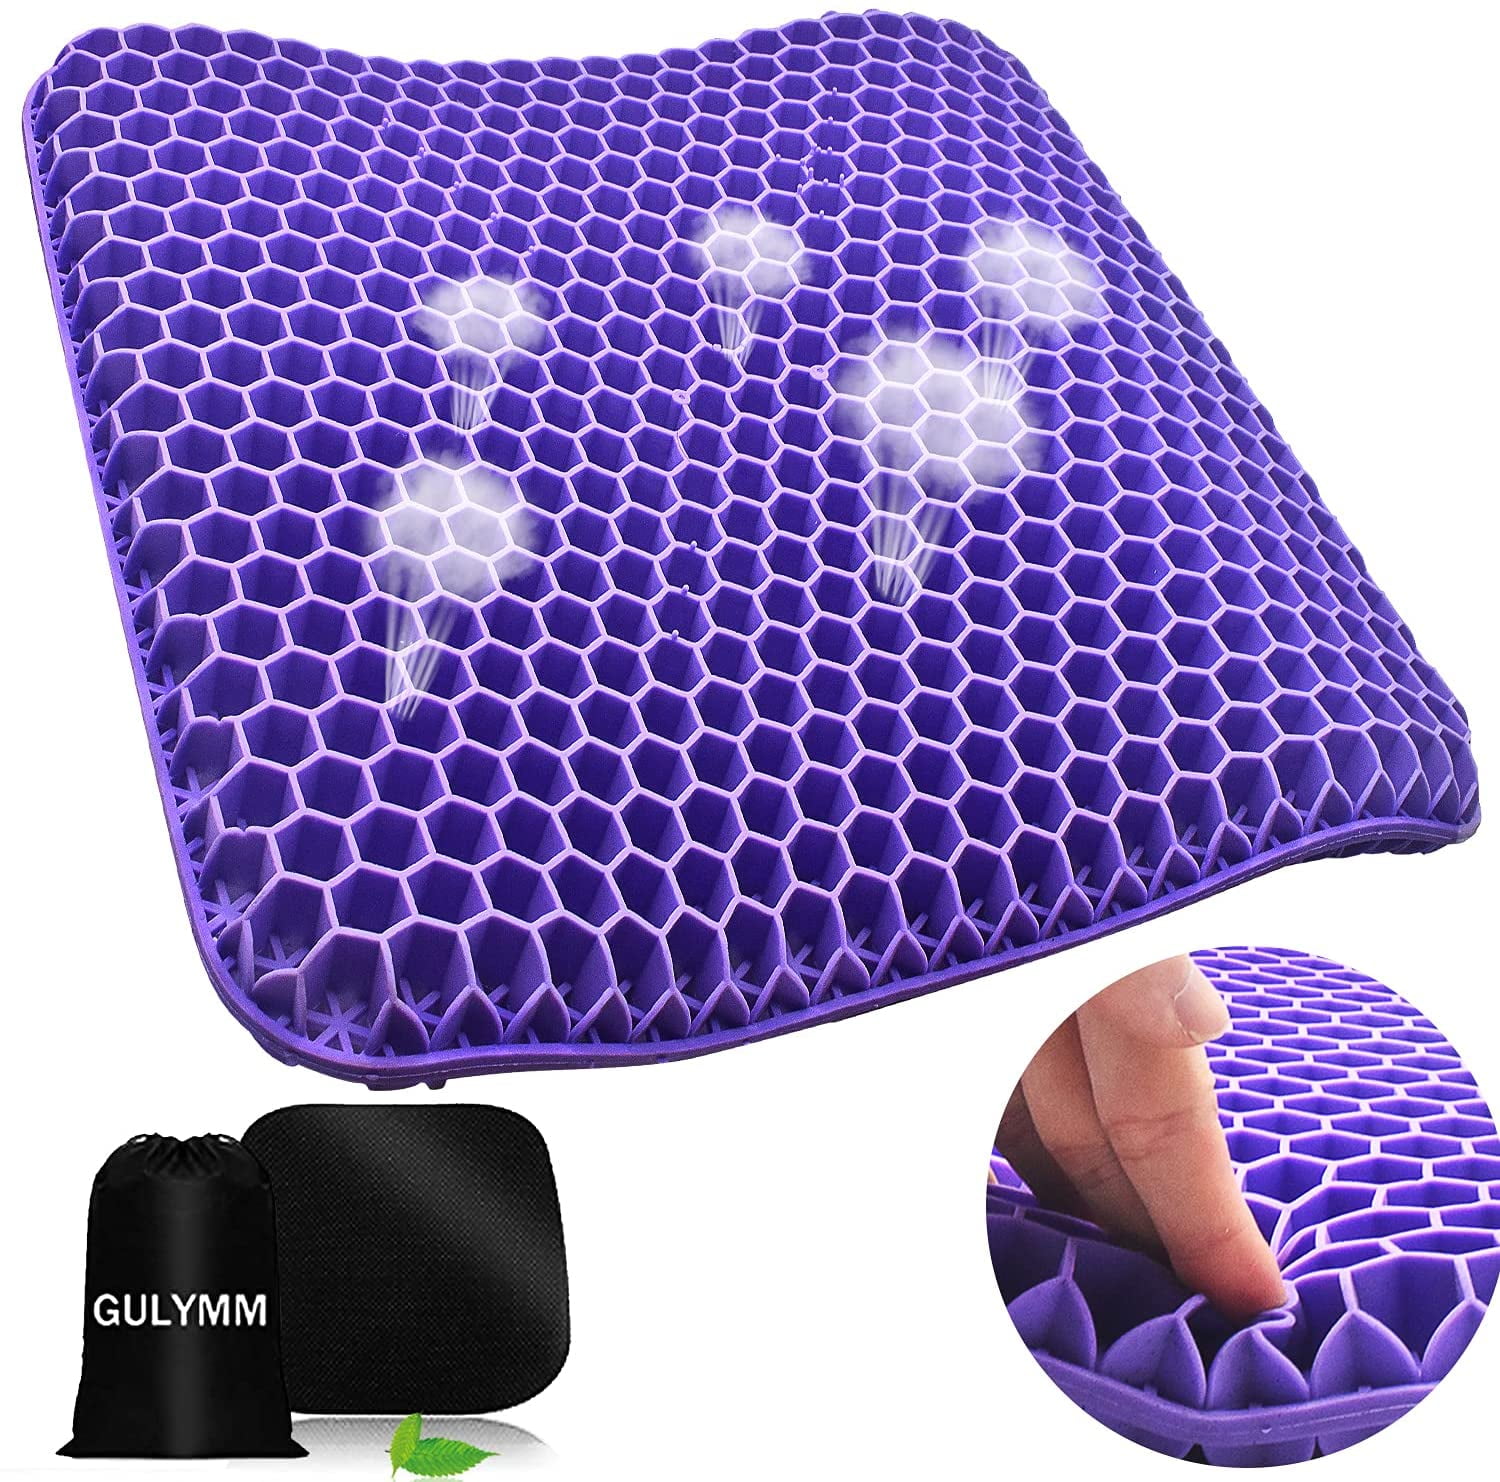  CloudBliss Gel Seat Cushion - Ergonomic Memory Foam Cushion for  Office Chair - Coccyx,Tailbone,Sciatica & Back Pain Relief - Desk Chair  Cushion for Long-Sitting Office Workers, Drivers(Black) : Office Products